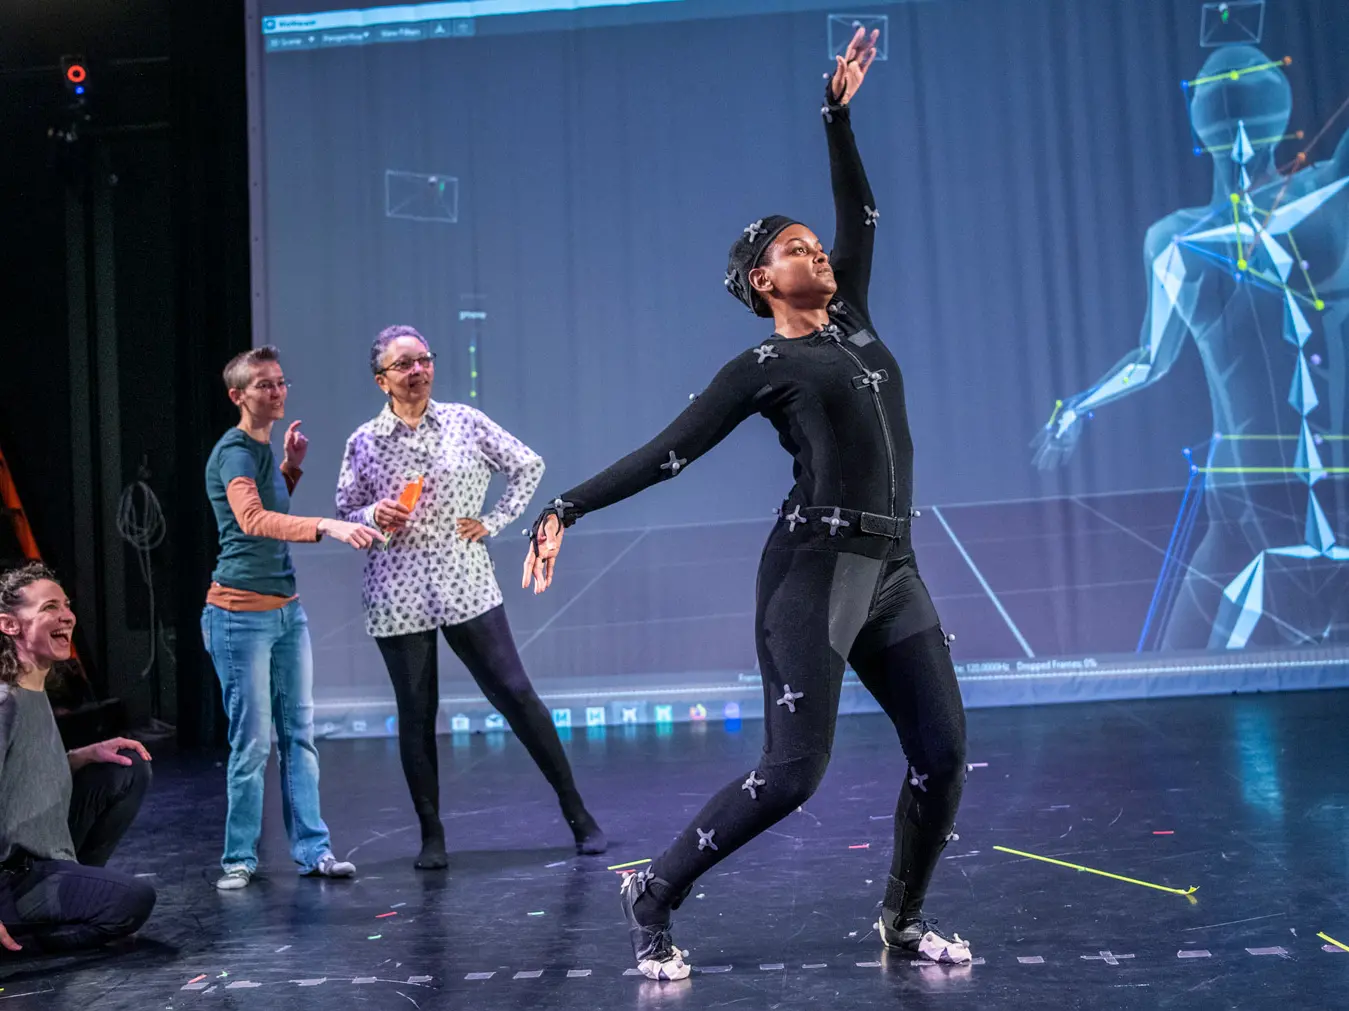 On a stage, a dancer in a black body suit and sensors steps forward and elegantly spreads her arms as three women behind her watch excitedly. A computer-generated geometrical illustration of the dancer highlights where her bones are as she moves.